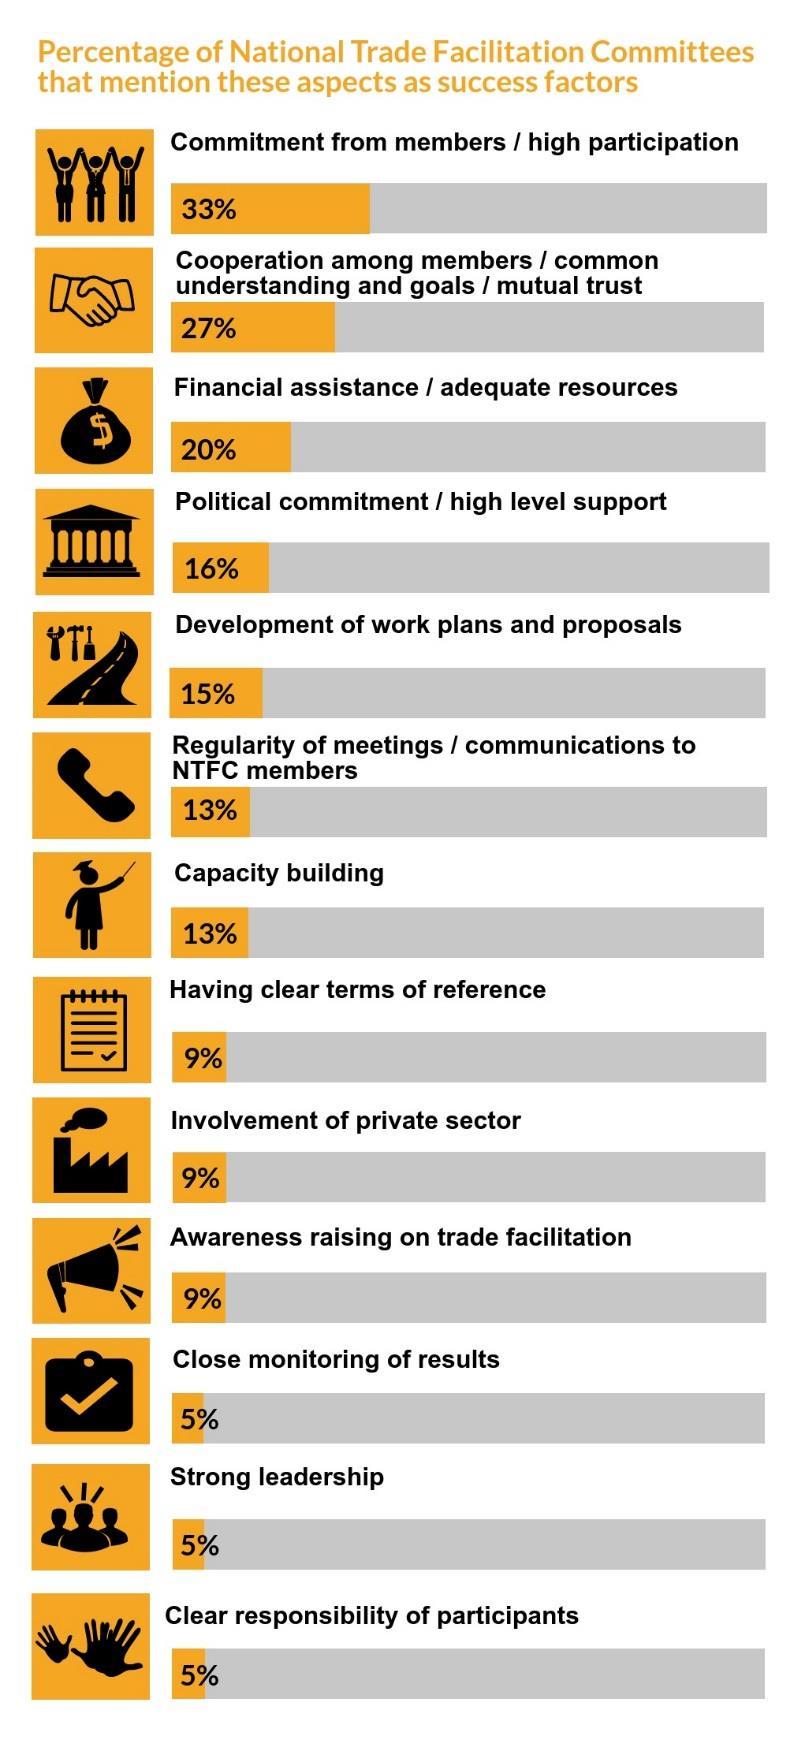 Figure 34: Main success factors for National Trade Facilitation Committees Source: UNCTAD, based on data from the